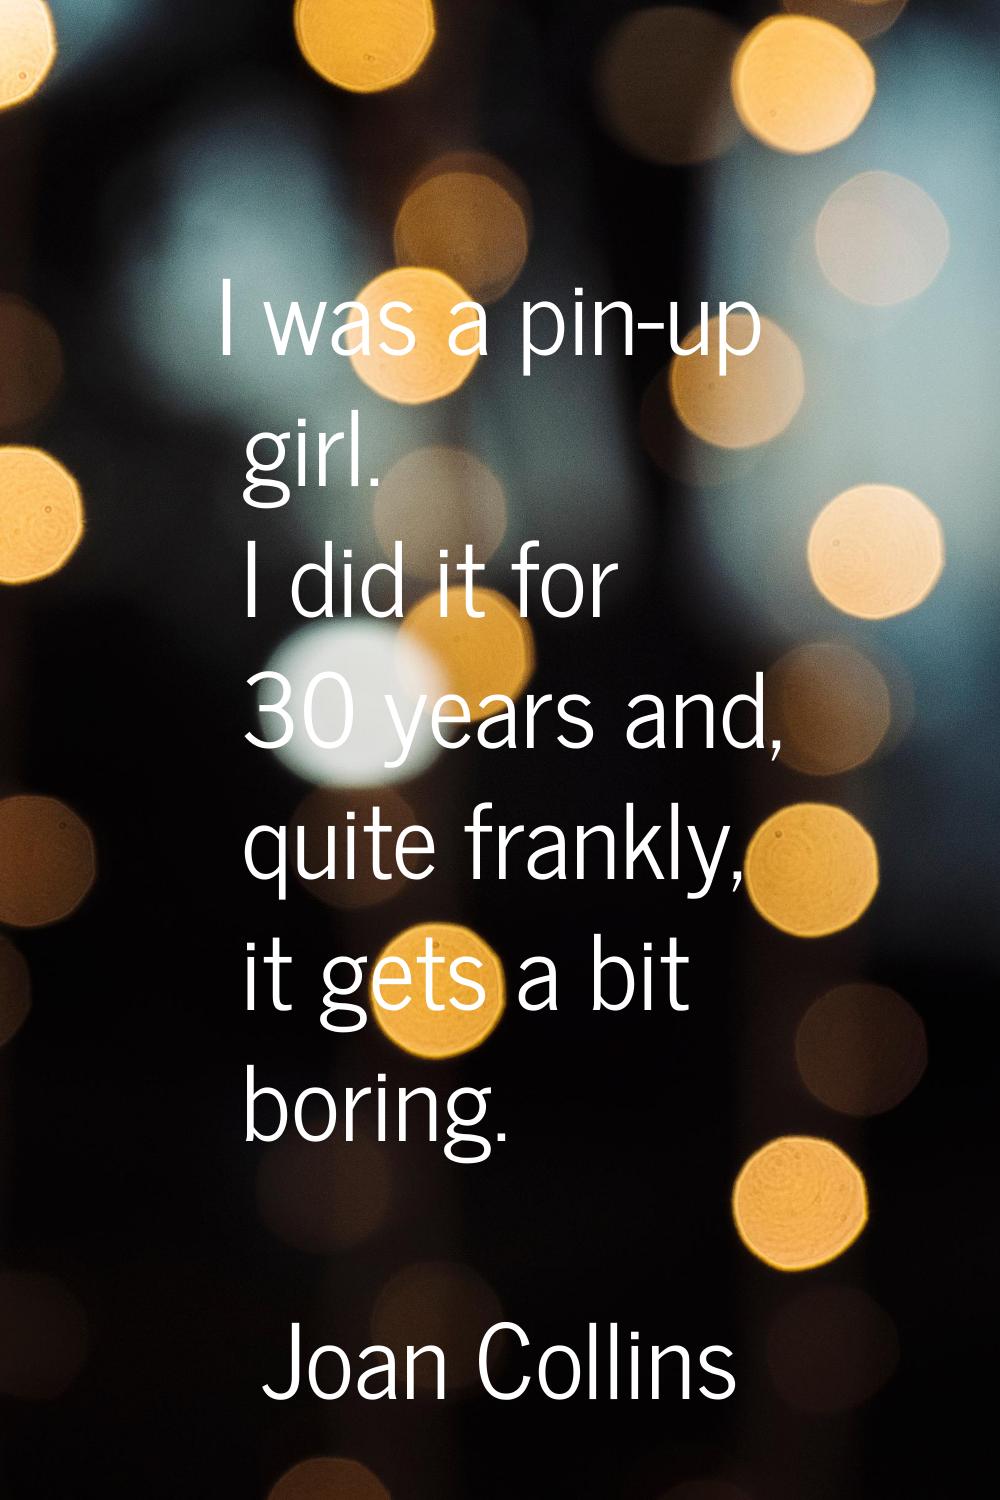 I was a pin-up girl. I did it for 30 years and, quite frankly, it gets a bit boring.